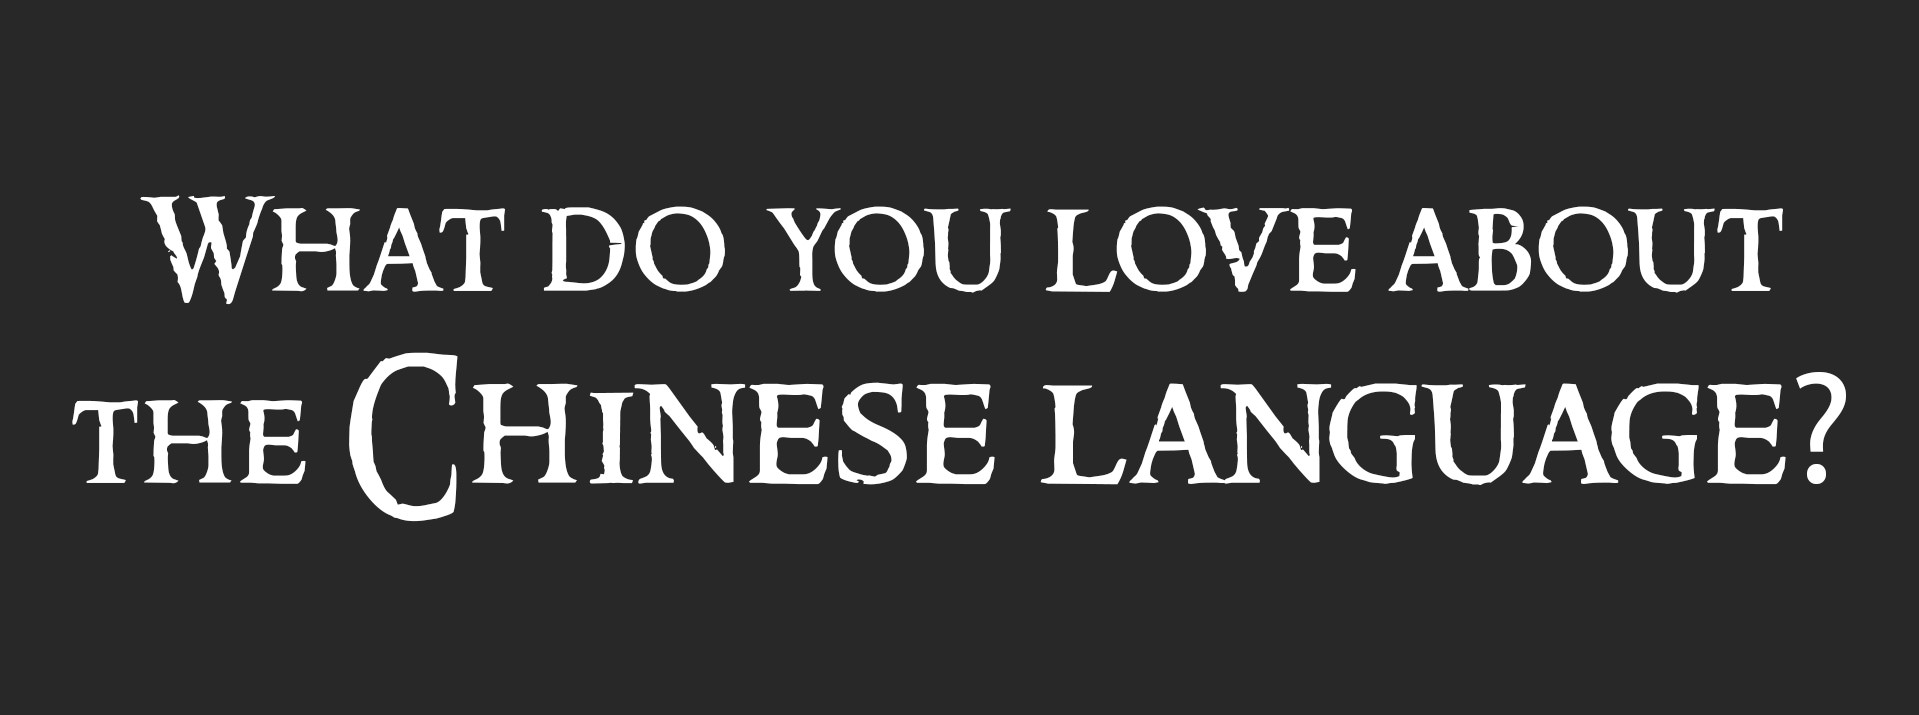 A graphic asks what do you love about the Chinese language?